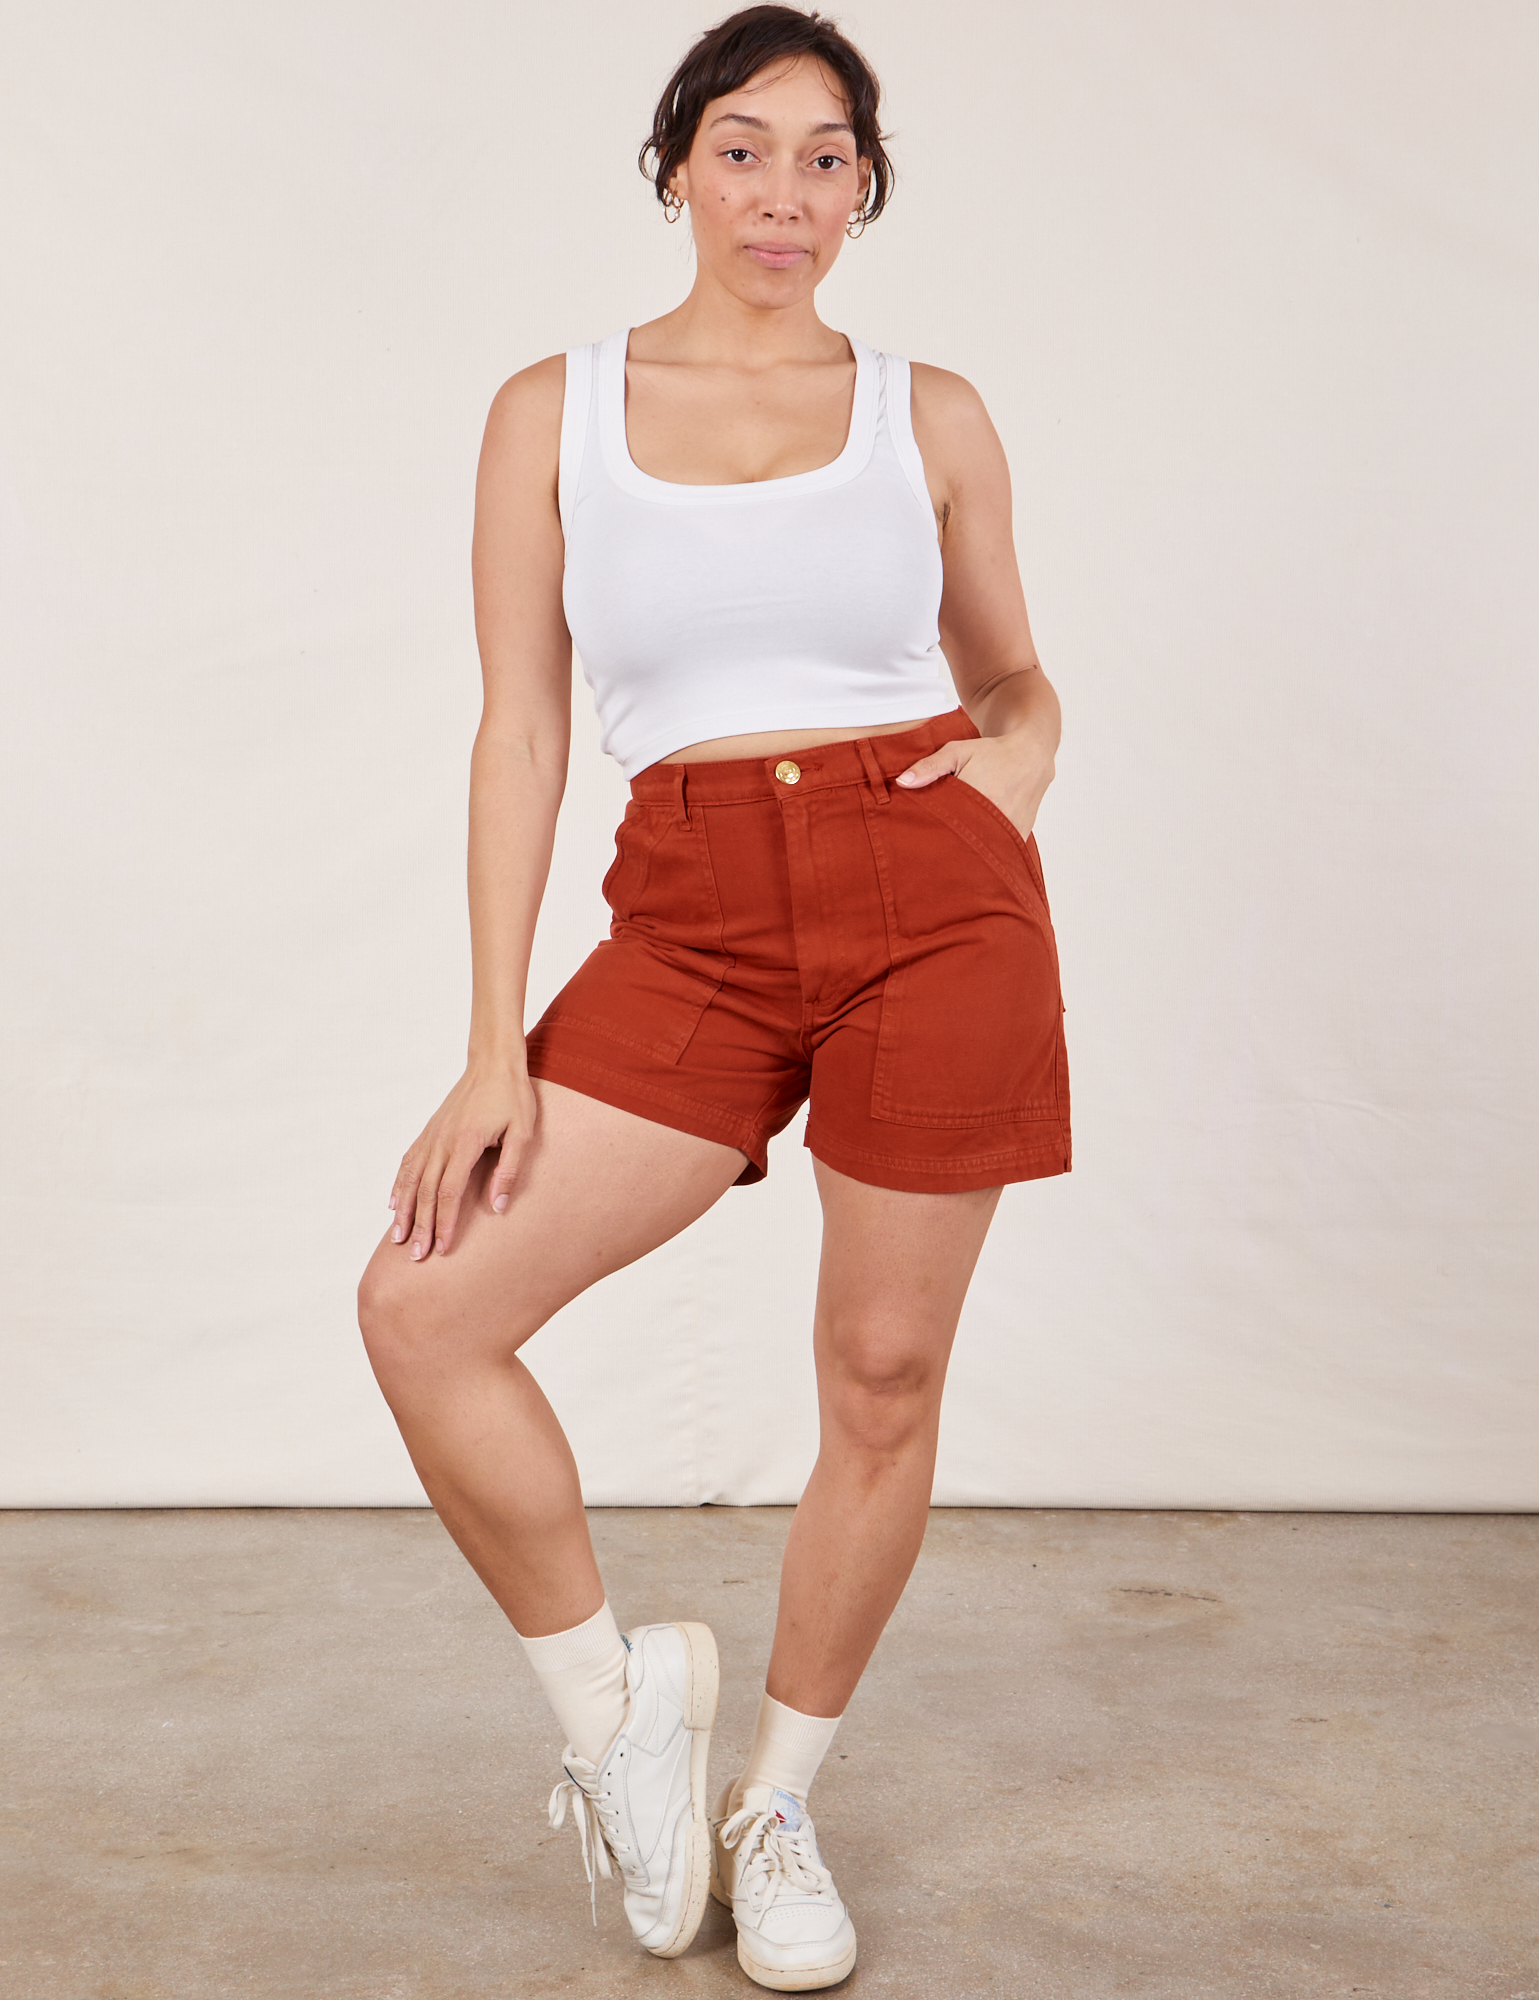 Tiara is wearing Classic Work Shorts in Paprika and Cropped Tank Top in vintage tee off-white